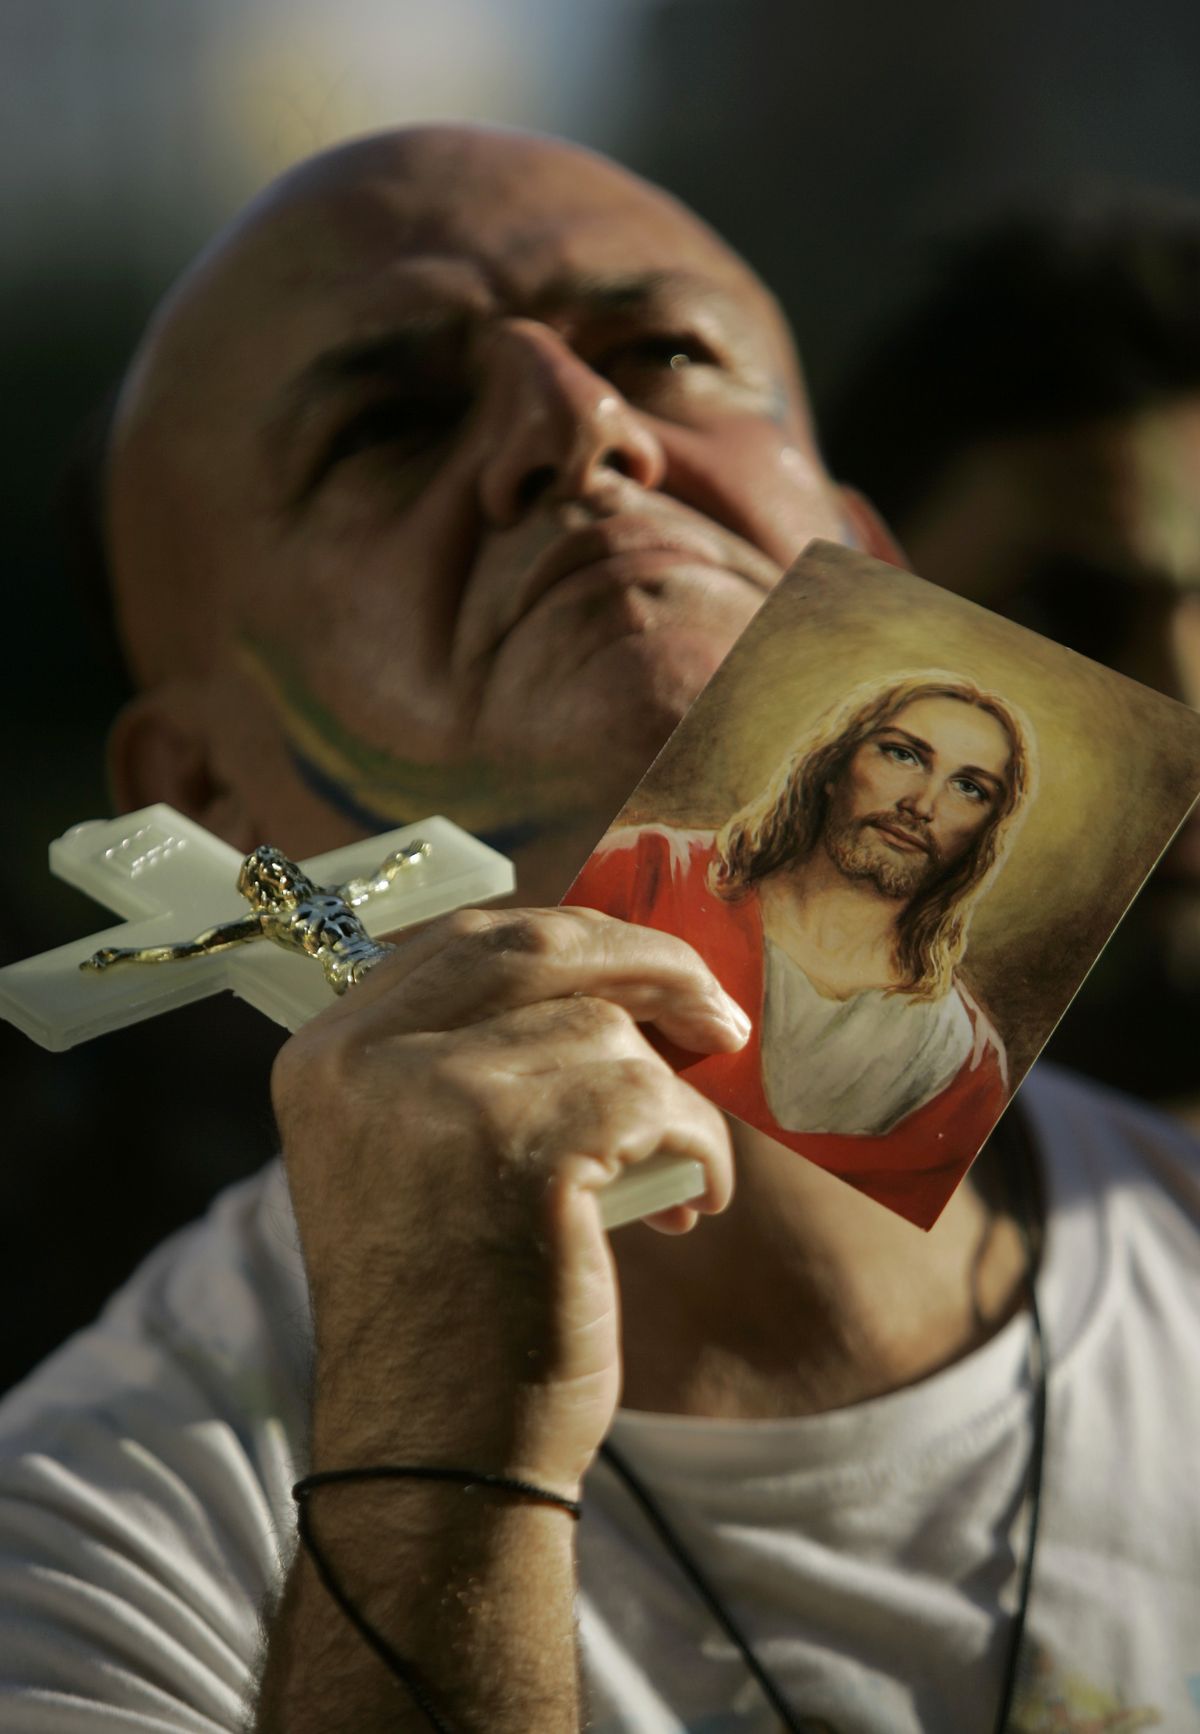 A Brazilian fan holds up a cross and an image of Jesus while watching the South Africa World Cup soccer match between Brazil vs North Korea on a giant screen, at Sao Paulo